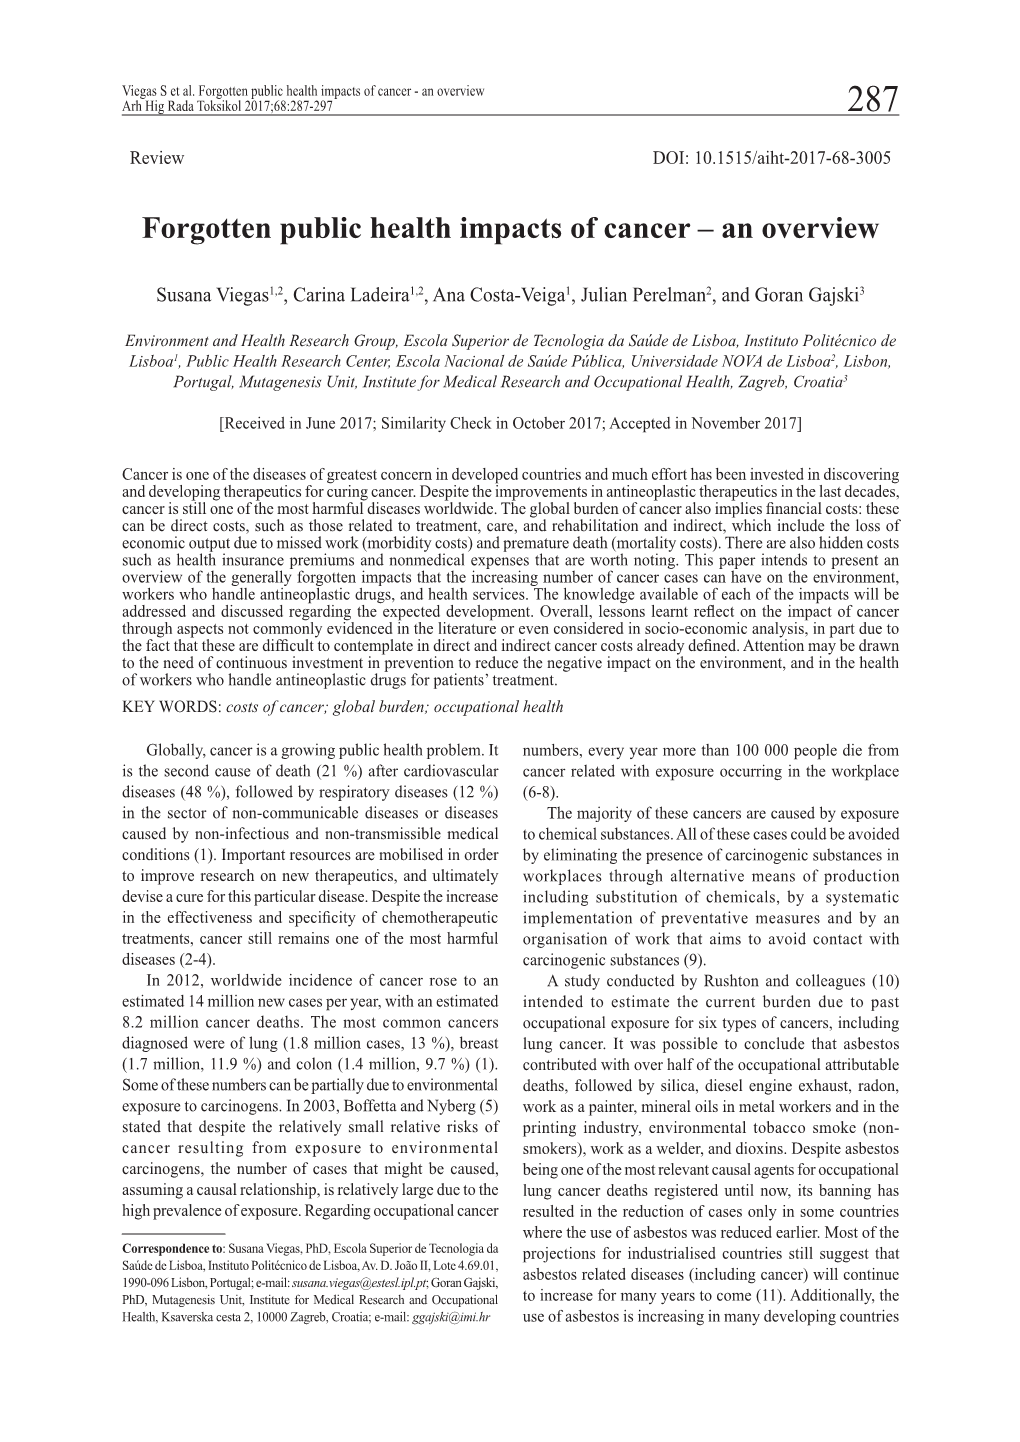 Forgotten Public Health Impacts of Cancer - an Overview Arh Hig Rada Toksikol 2017;68:287-297 287